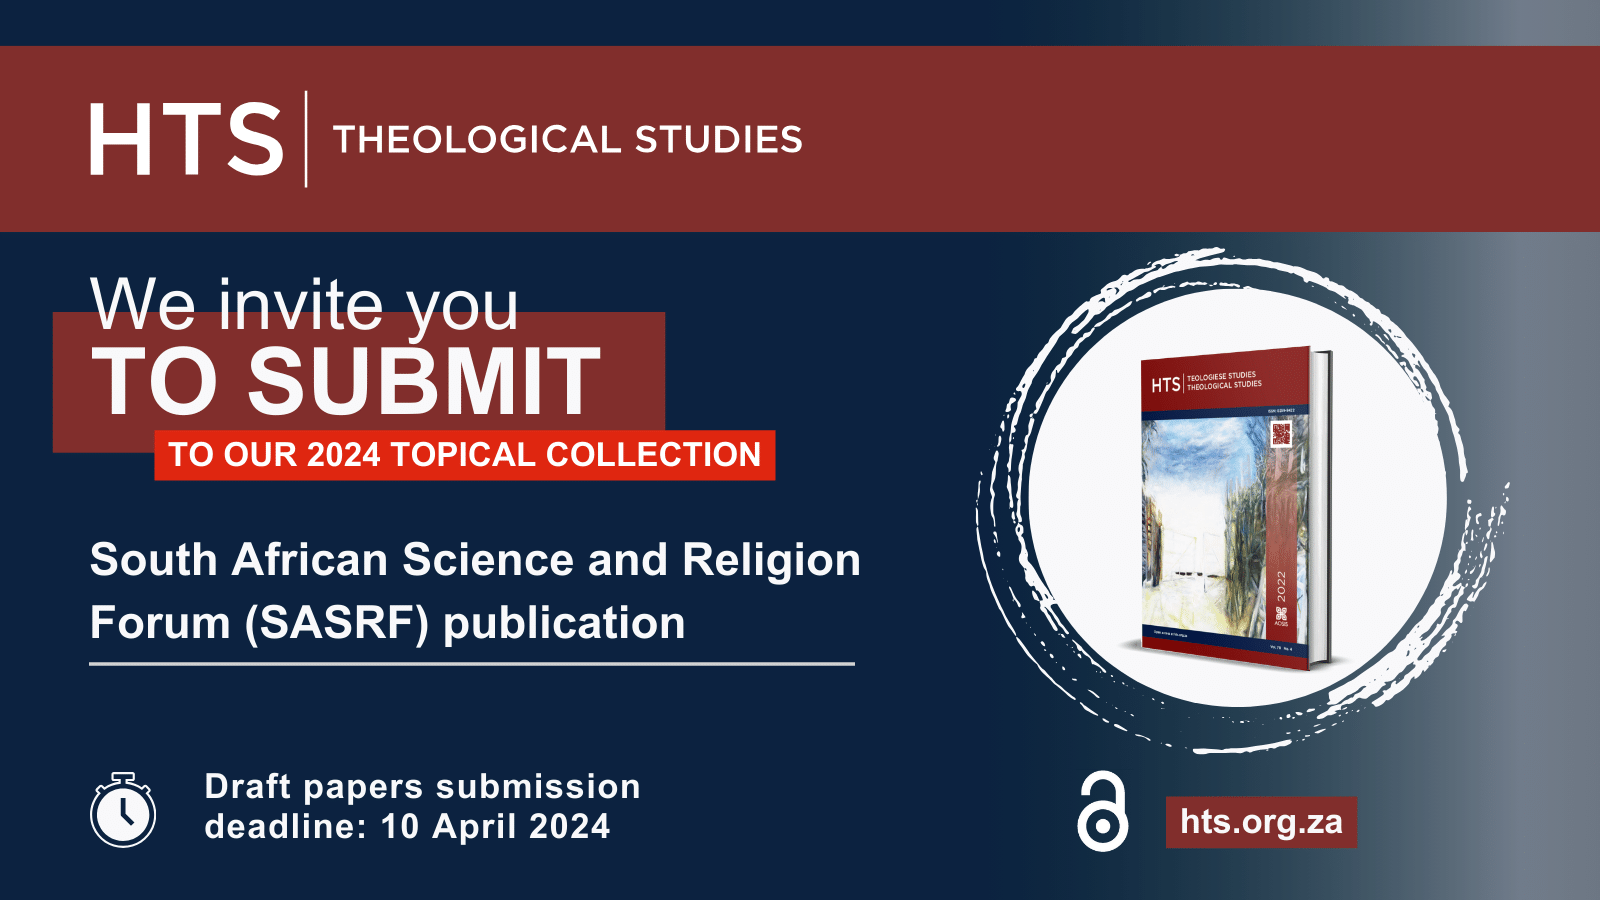 'HTS Theological Studies' 2024 Topical Collection